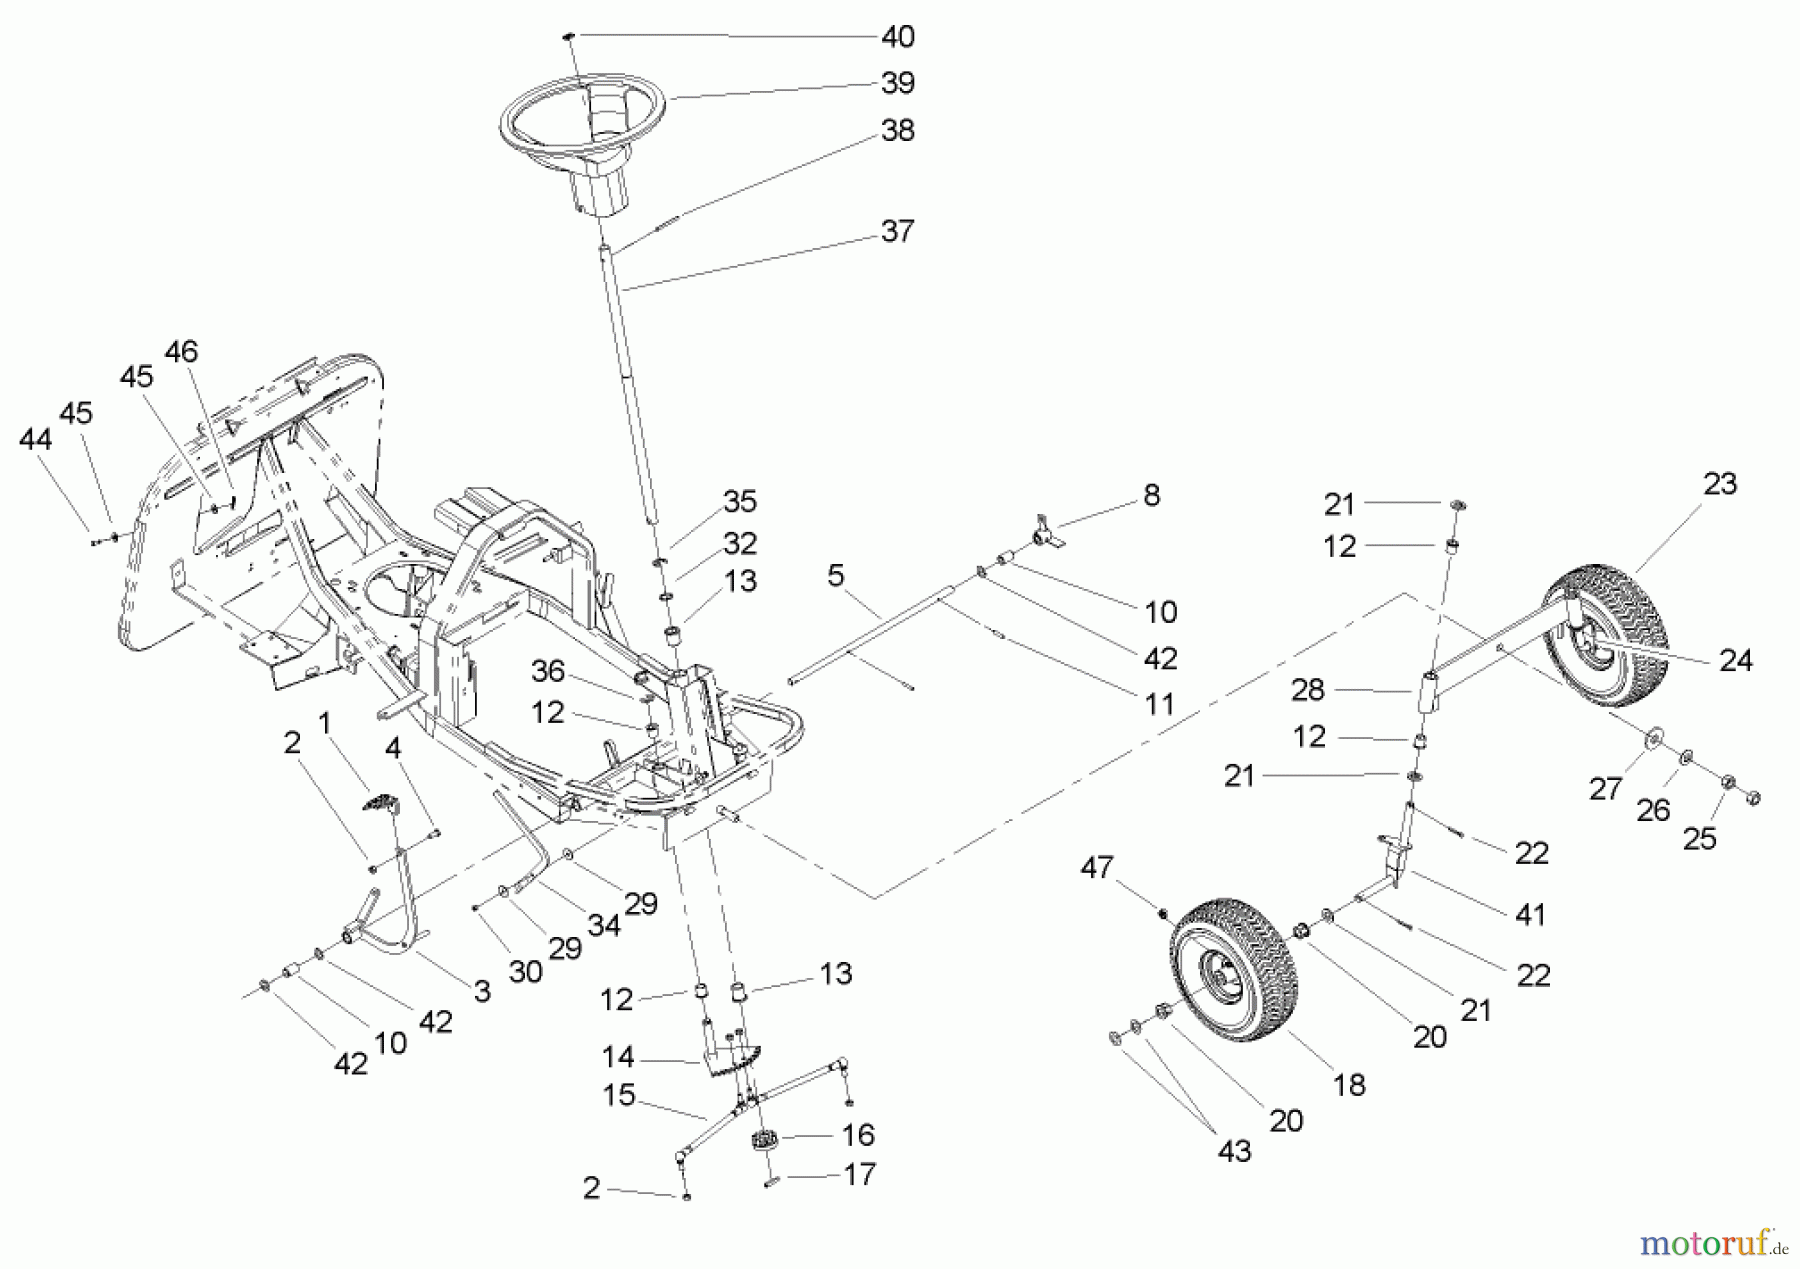  Toro Neu Mowers, Rear-Engine Rider 70185 (G132) - Toro G132 Rear-Engine Riding Mower, 2005 (250000001-250999999) FRONT AXLE AND STEERING ASSEMBLY